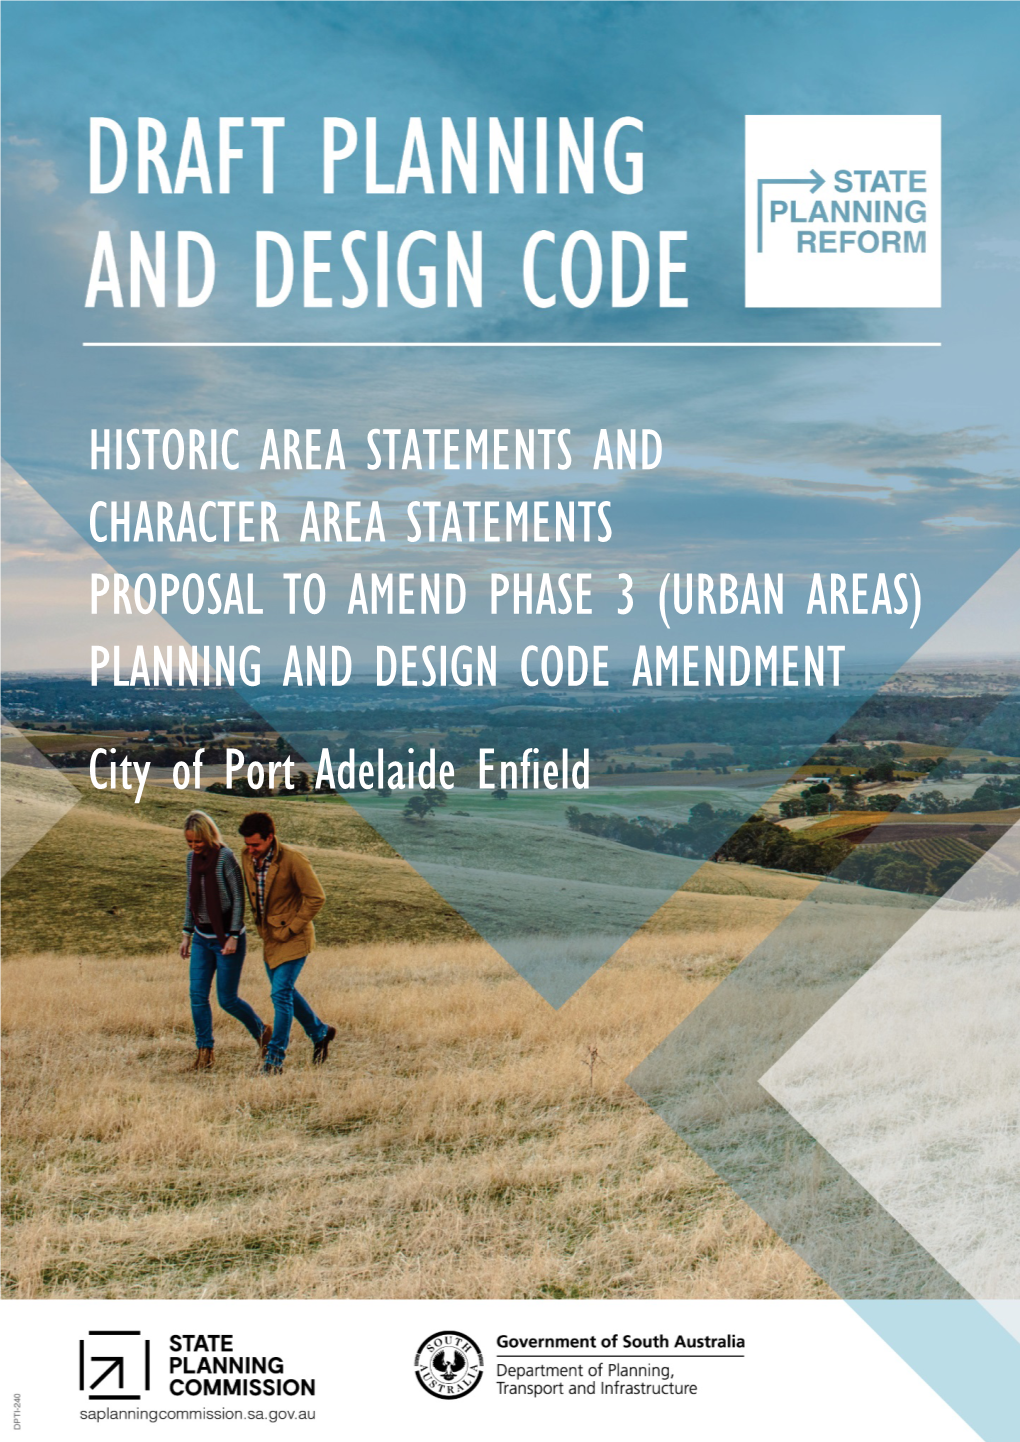 HISTORIC AREA STATEMENTS and CHARACTER AREA STATEMENTS PROPOSAL to AMEND PHASE 3 (URBAN AREAS) PLANNING and DESIGN CODE AMENDMENT City of Port Adelaide Enfield